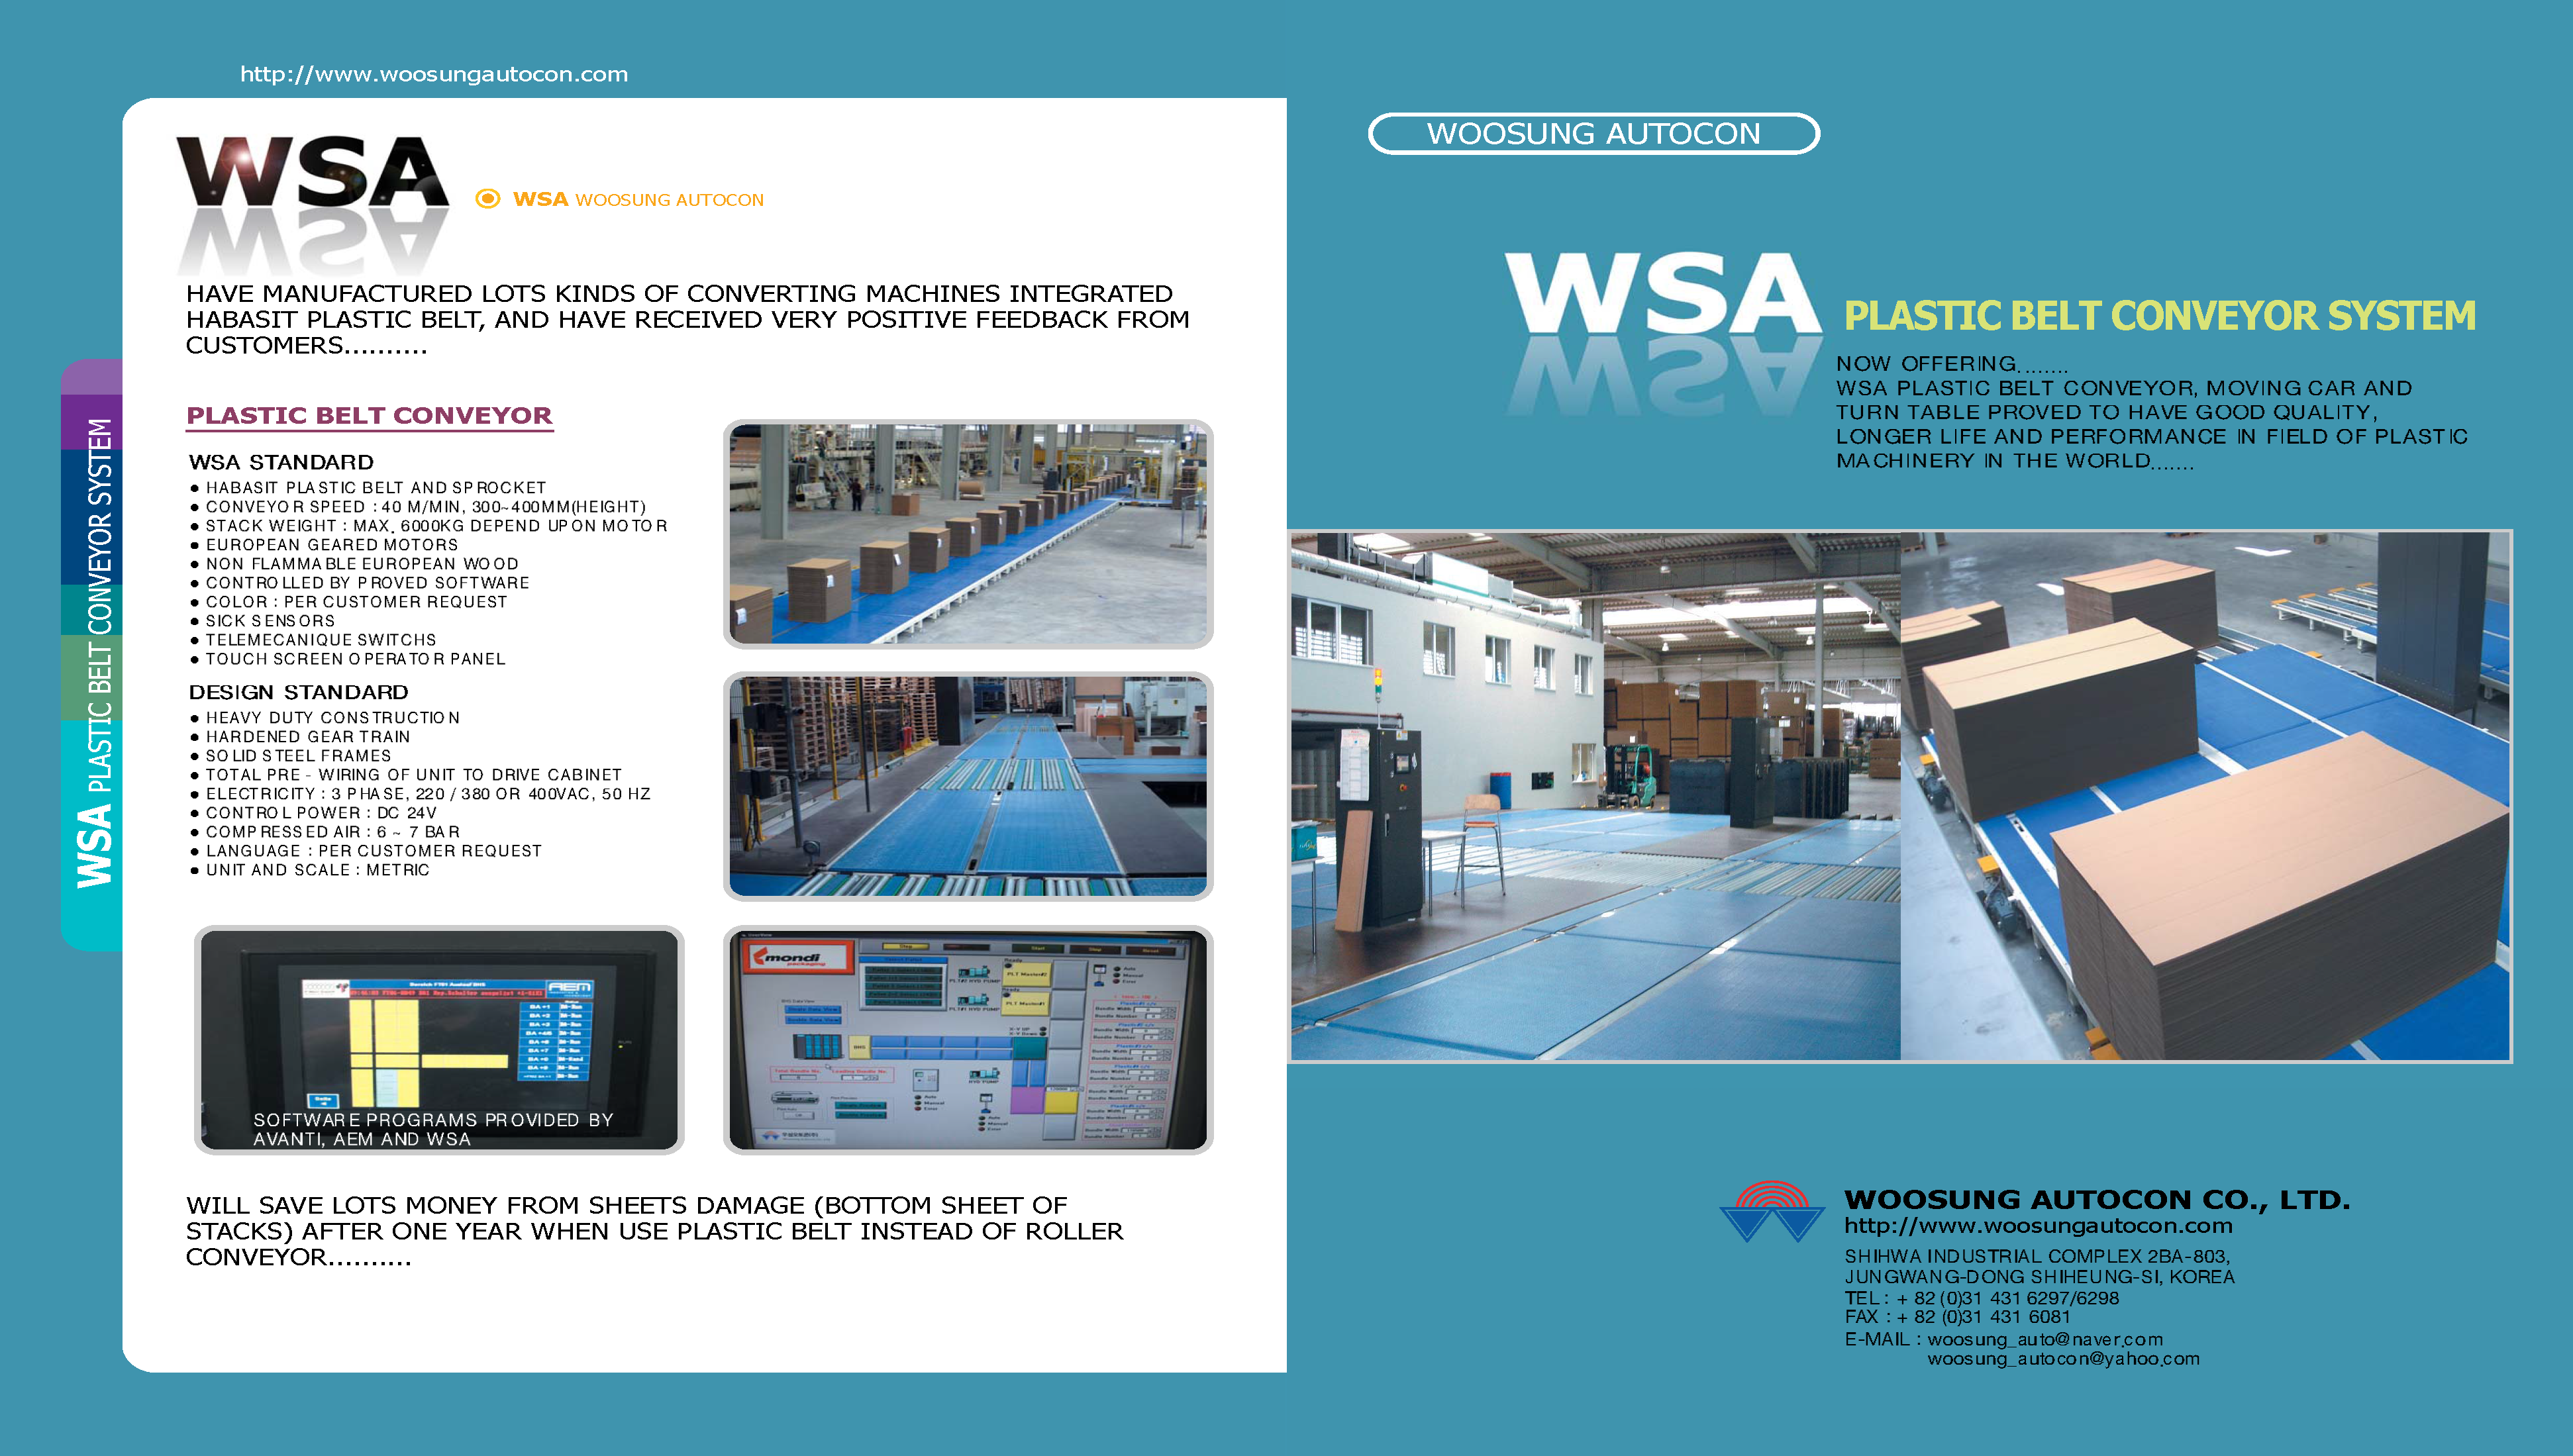 Learn more with WSA’s Plastic Belt Conveyor Systems Brochure.